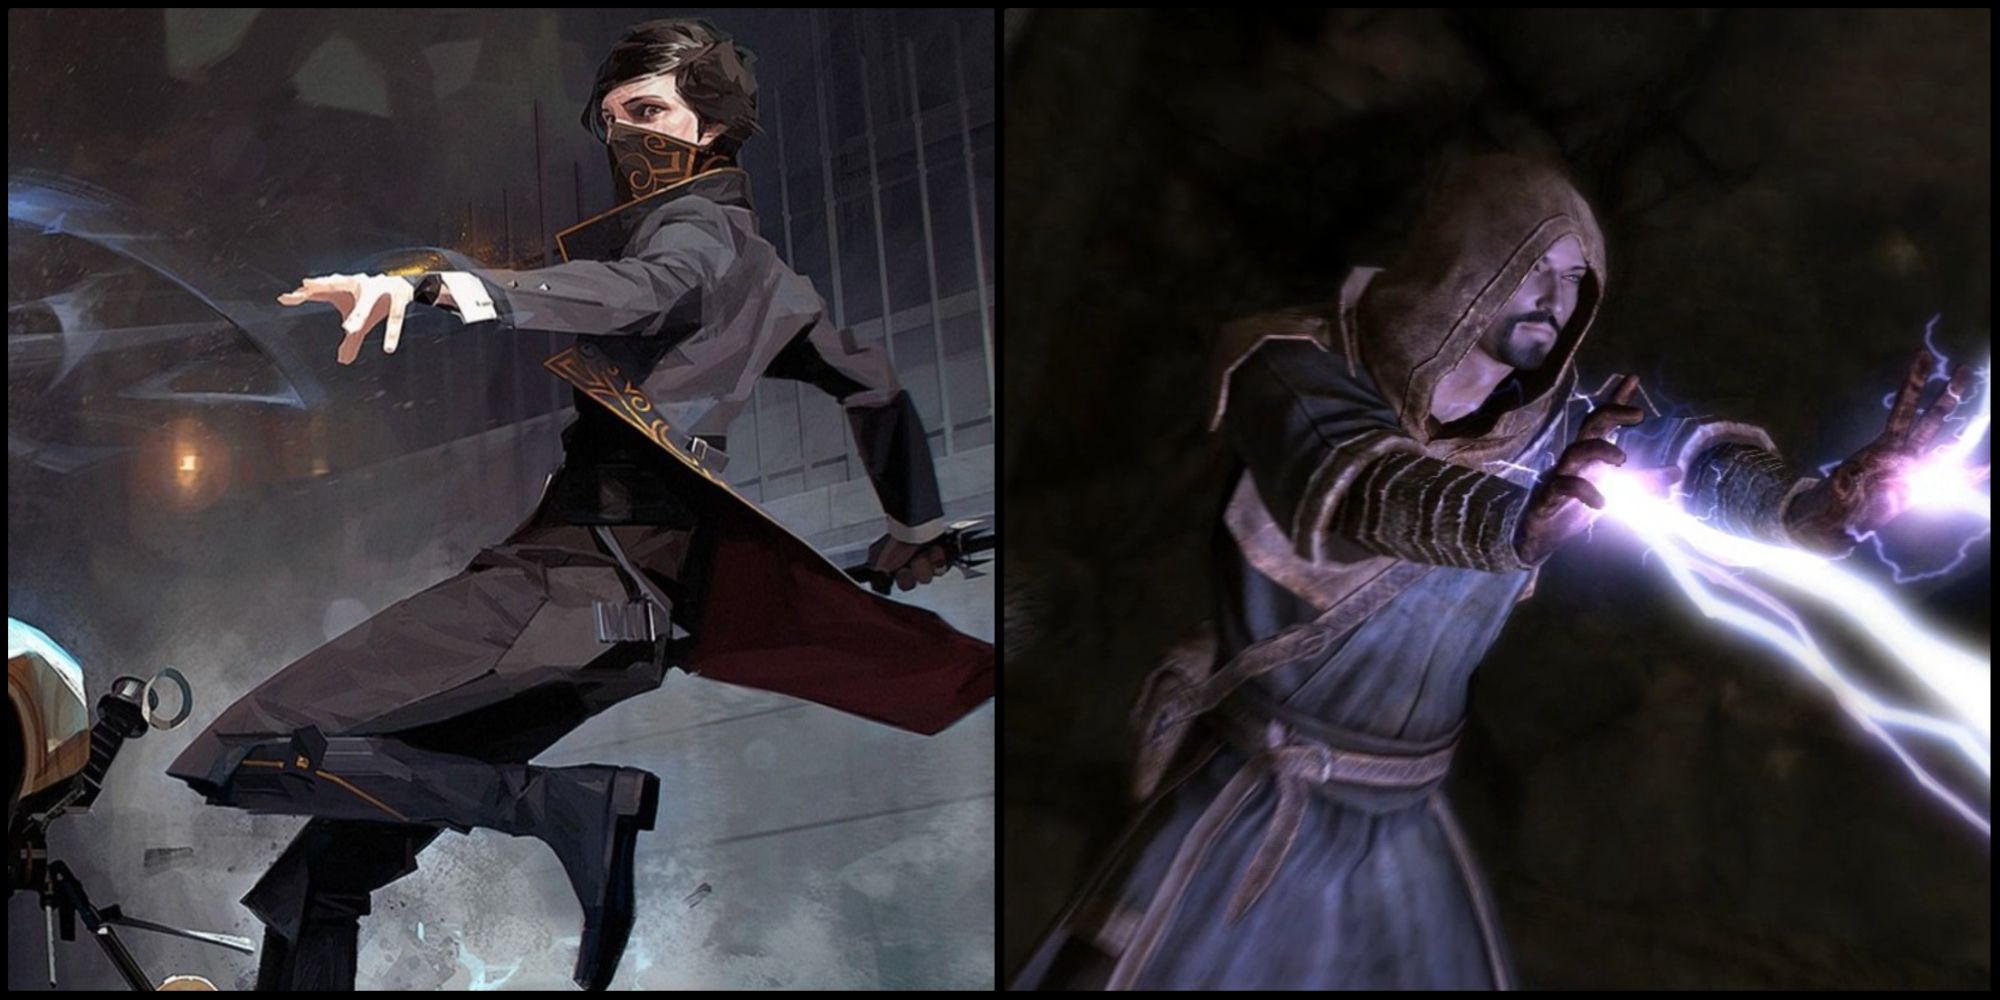 protagonists from Dishonored and Skyrim casting spells